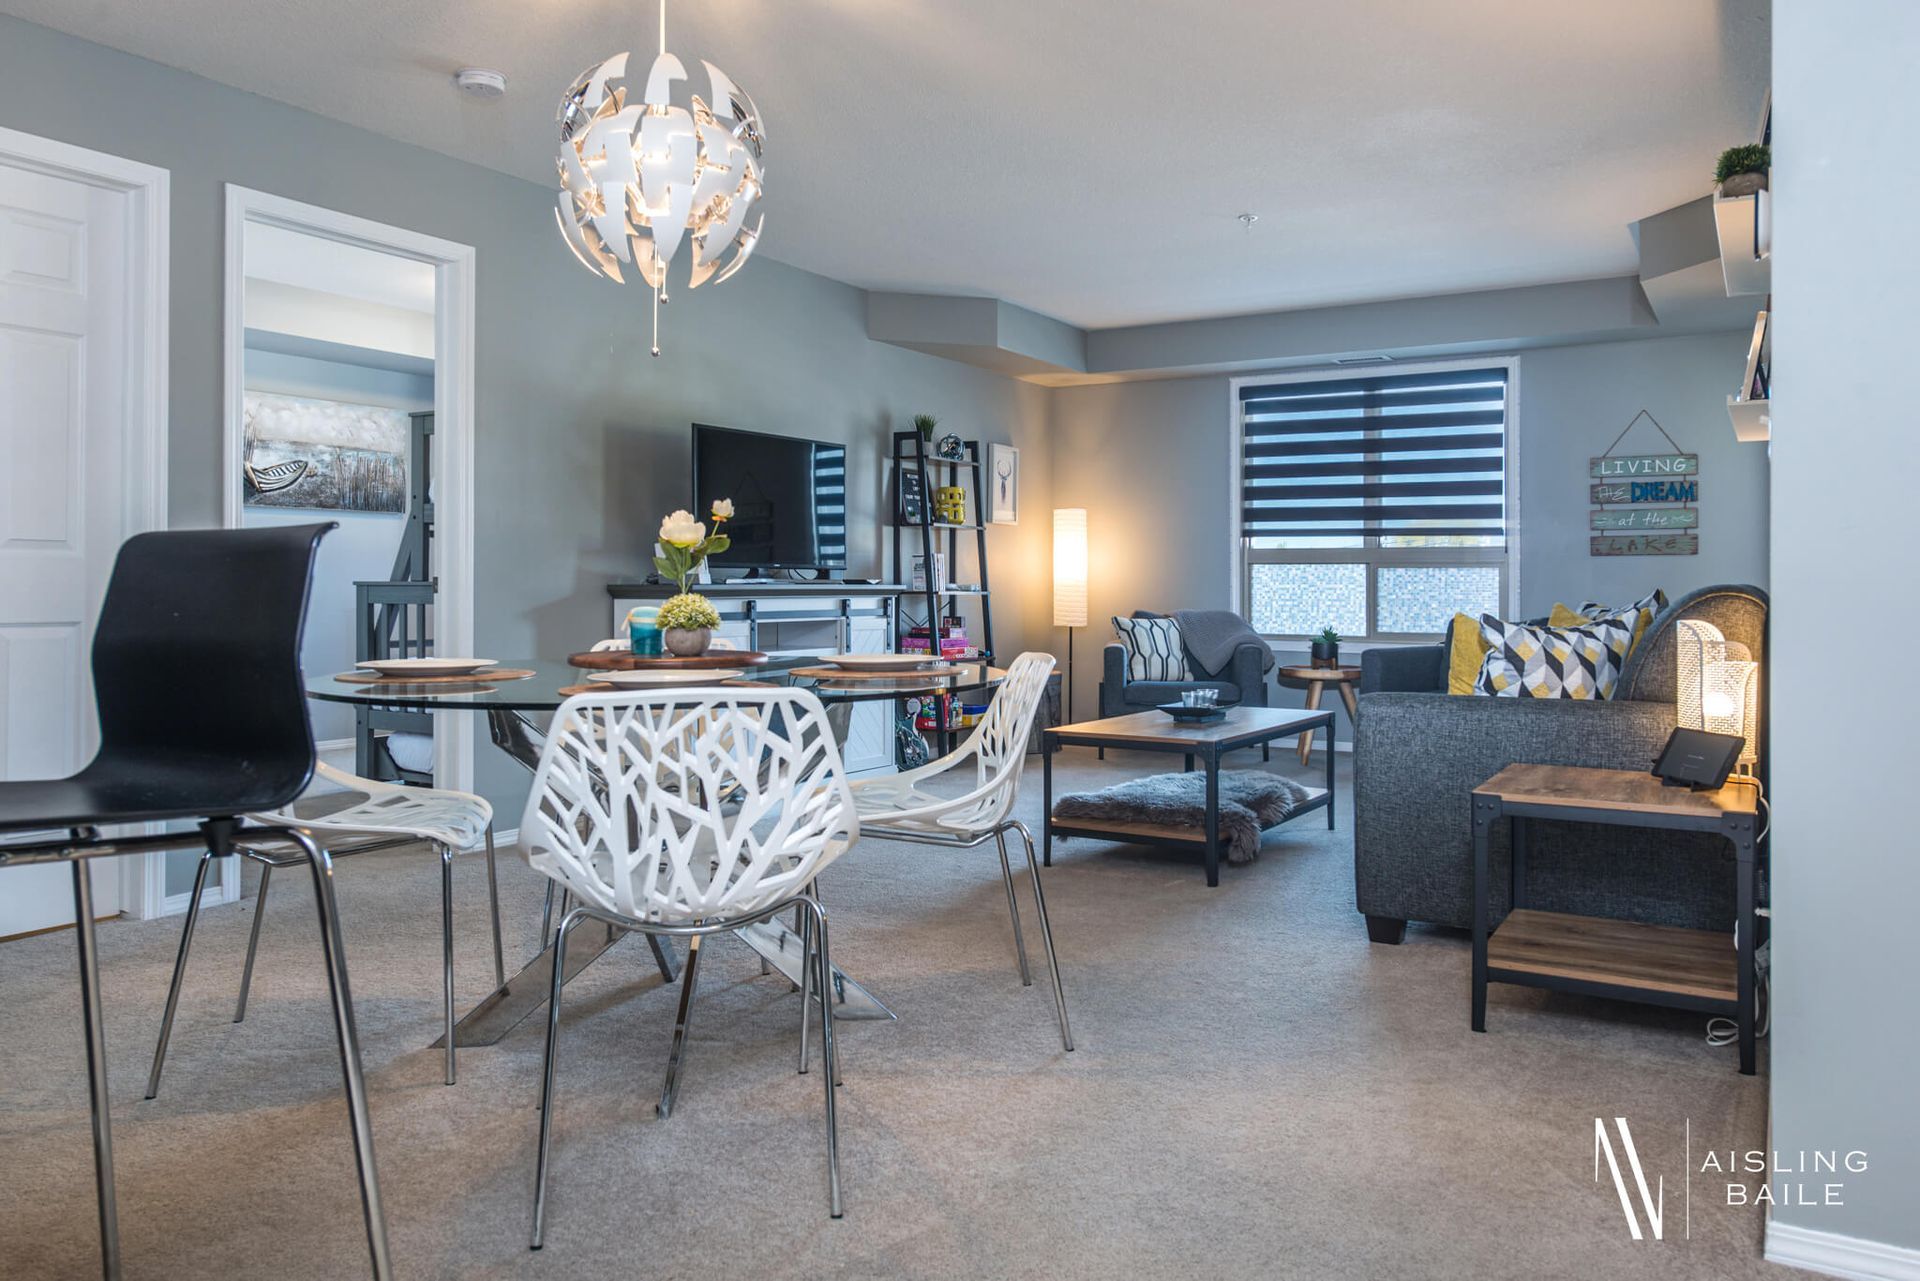 Dining area at the Trendy condo at Lake Windermere Pointe in Invermere, a BC Vacation Rental hosted by Aisling Baile Property Management.